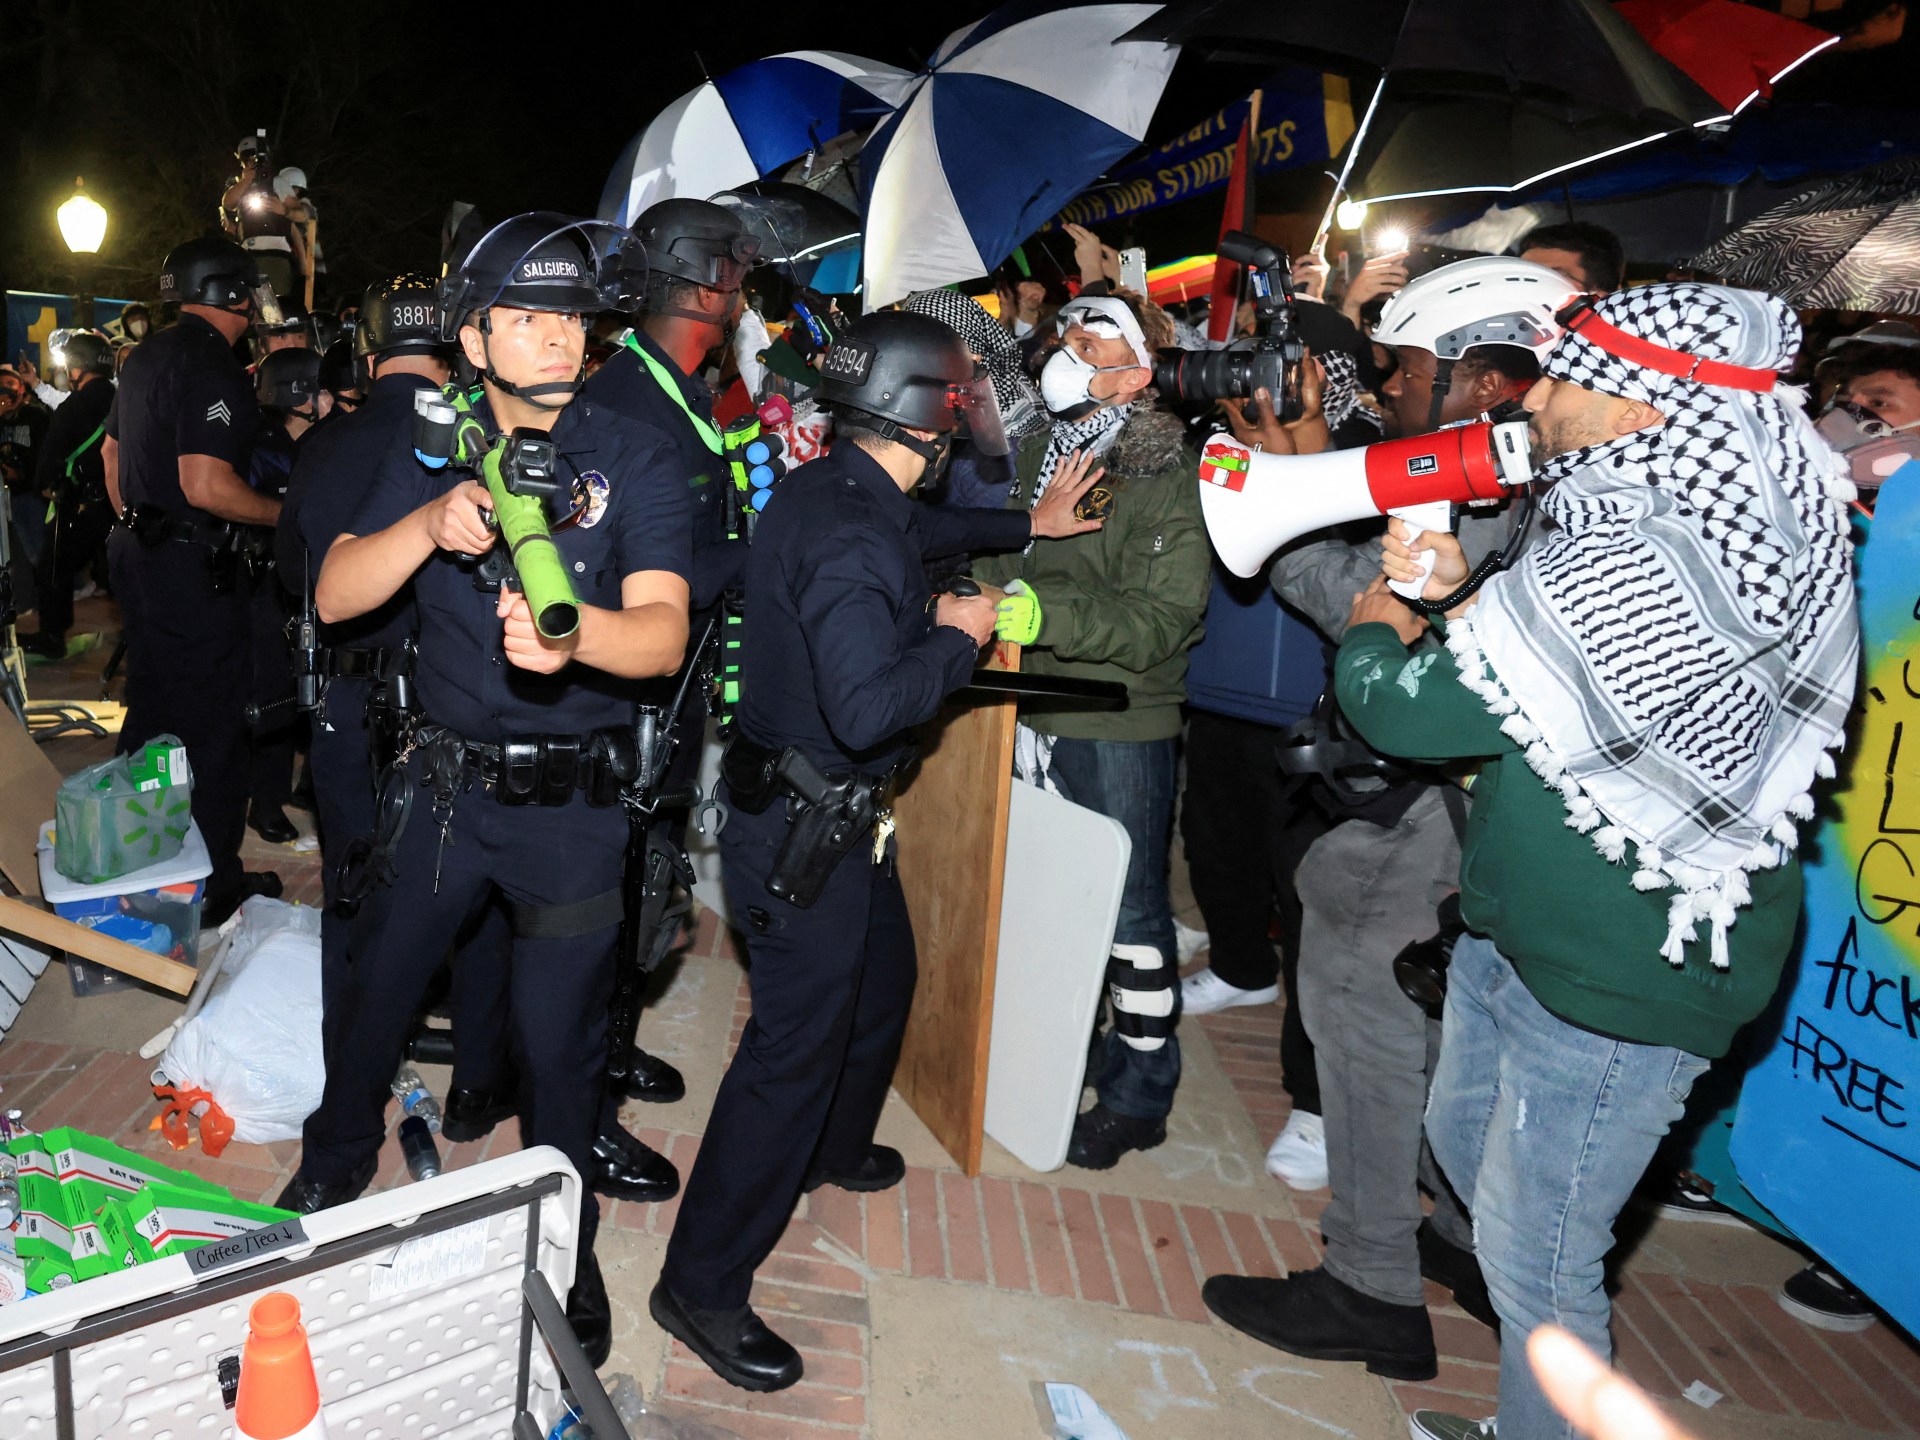 UCLA students arrested amid Gaza protests: All you need to know